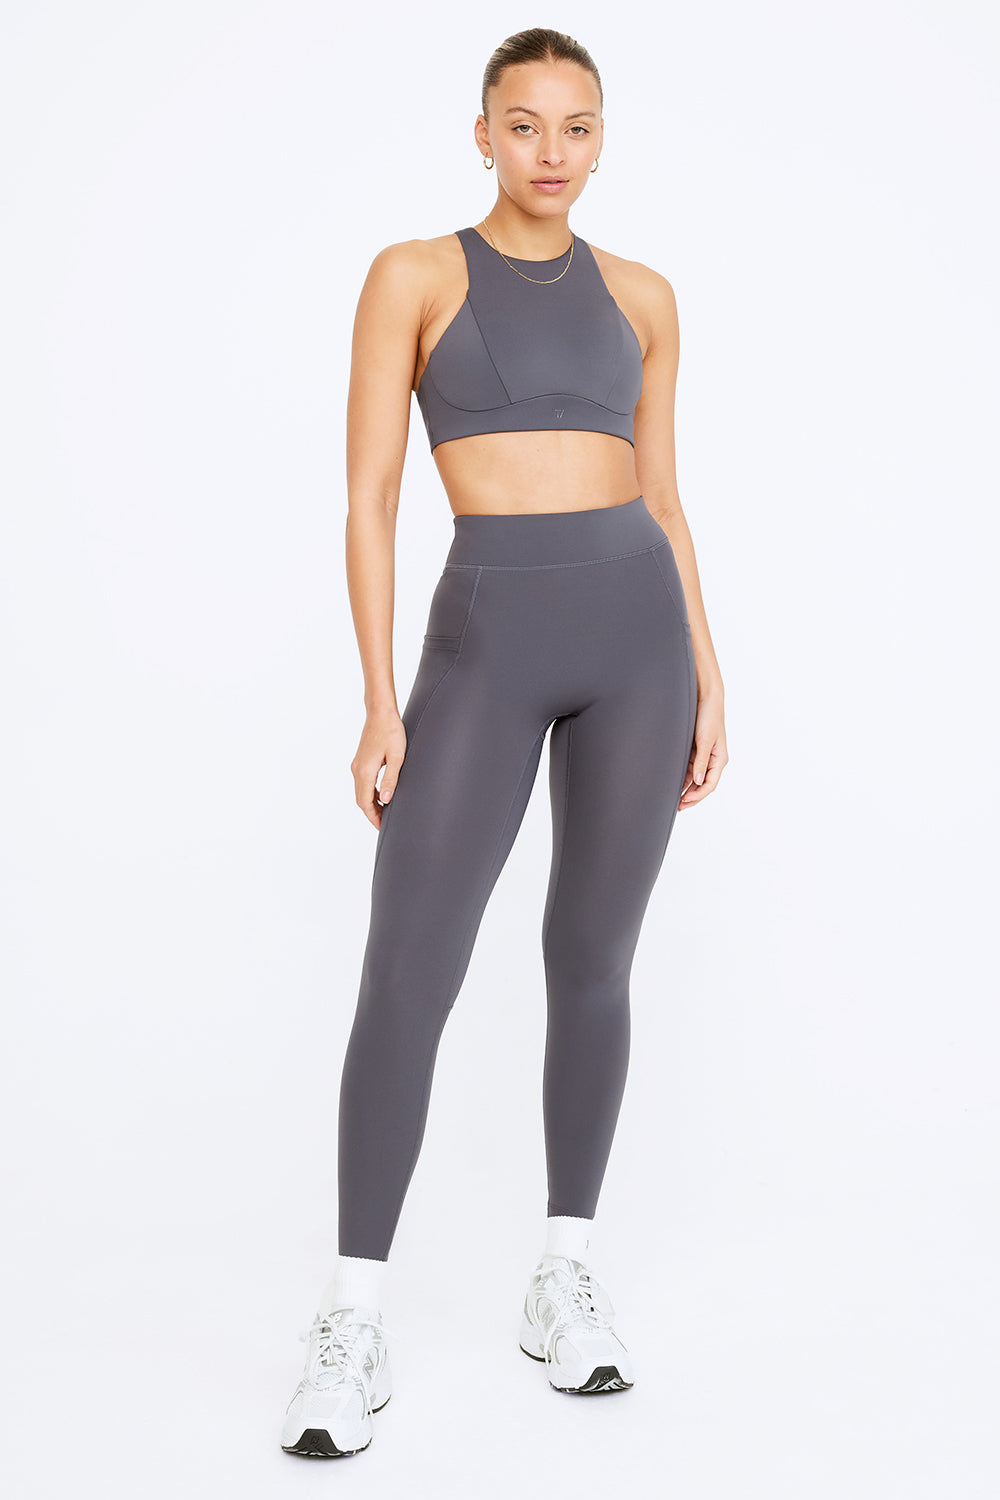 PROJECT VOLLEY HIGH NECK BRA LEGGING CHARCOAL 010